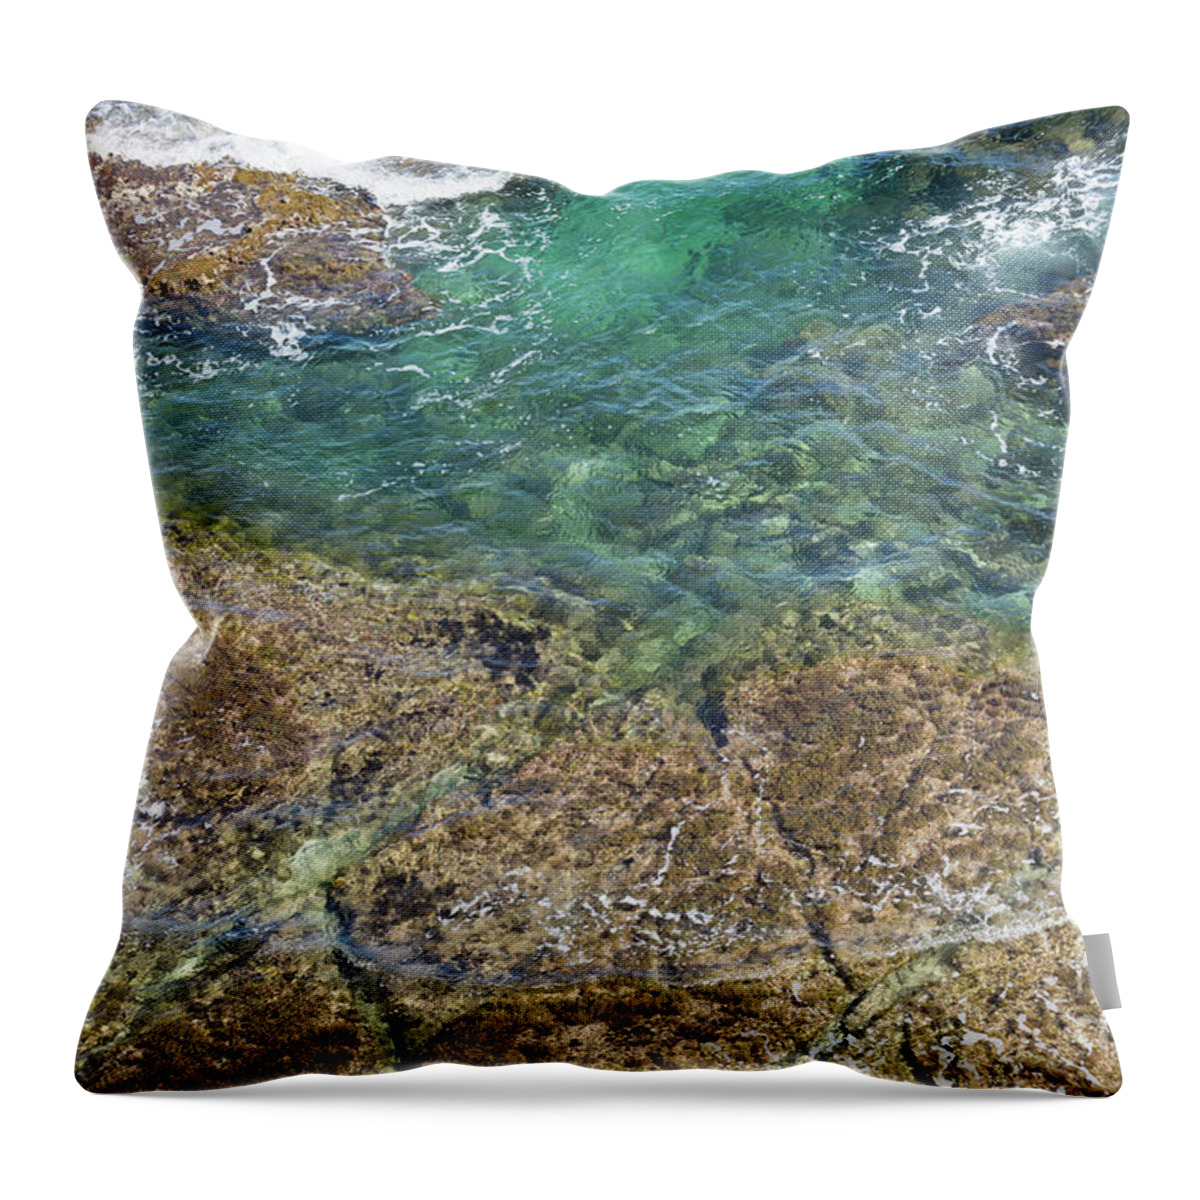 Turquoise Throw Pillow featuring the photograph Turquoise Blue Water And Rocks On The Coast by Adriana Mueller